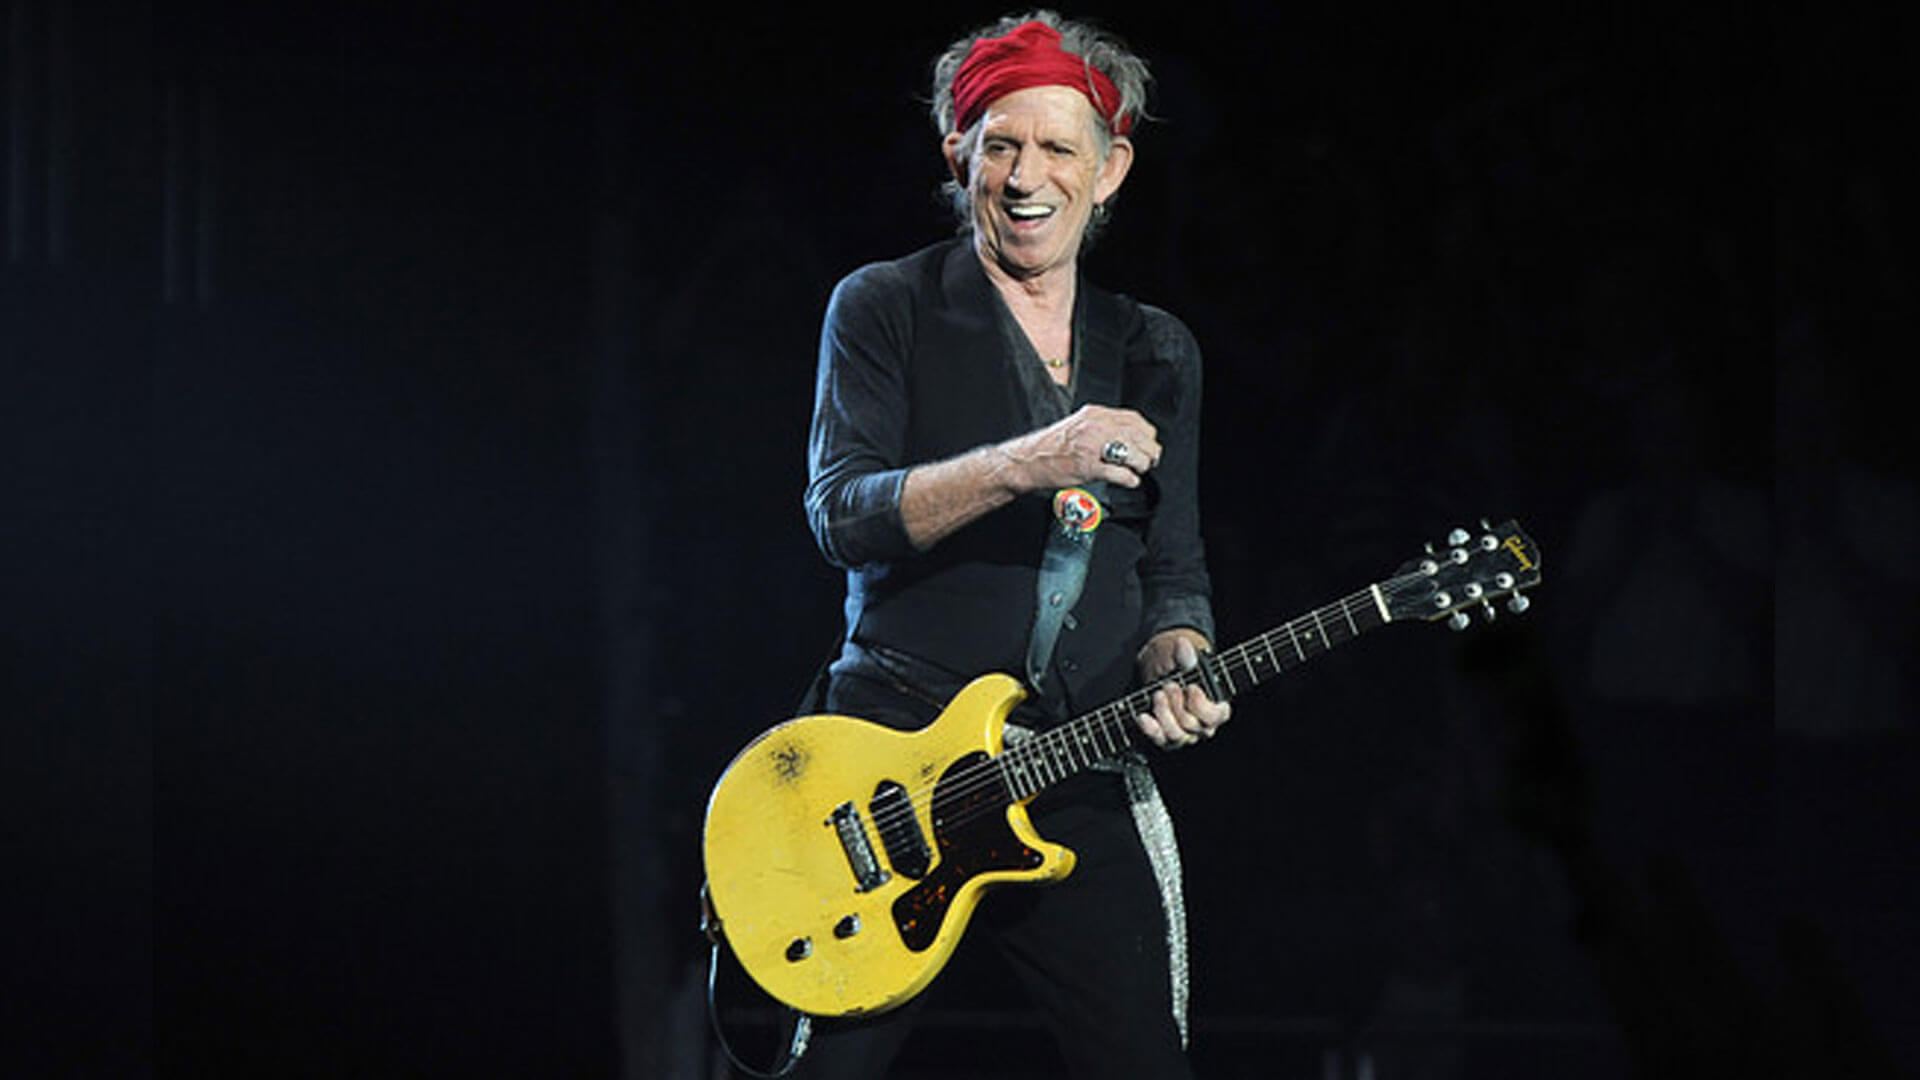 Keith Richards with Gibson guitar, Rock 'n' roll garage, Music icon, 1920x1080 Full HD Desktop